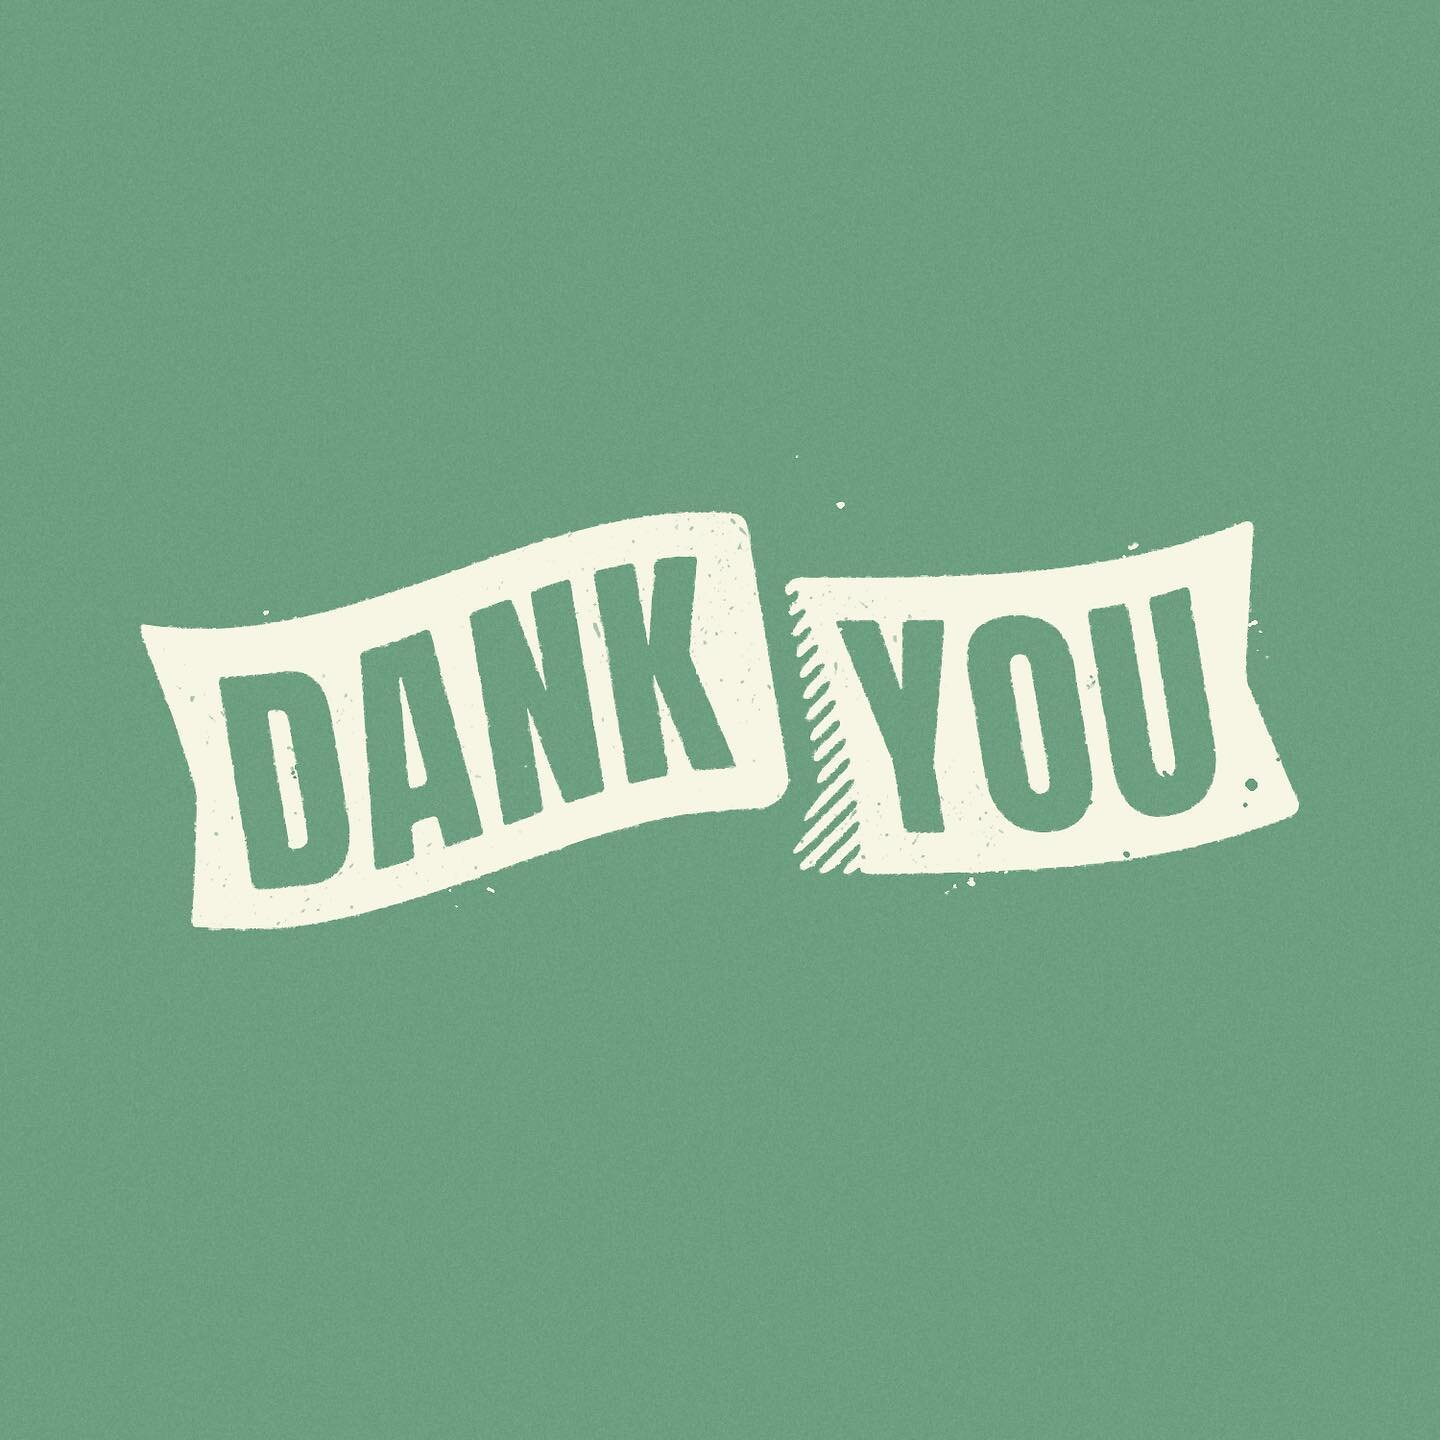 Dank You agency branding. 

Keep an eye out for some very exciting things from them.